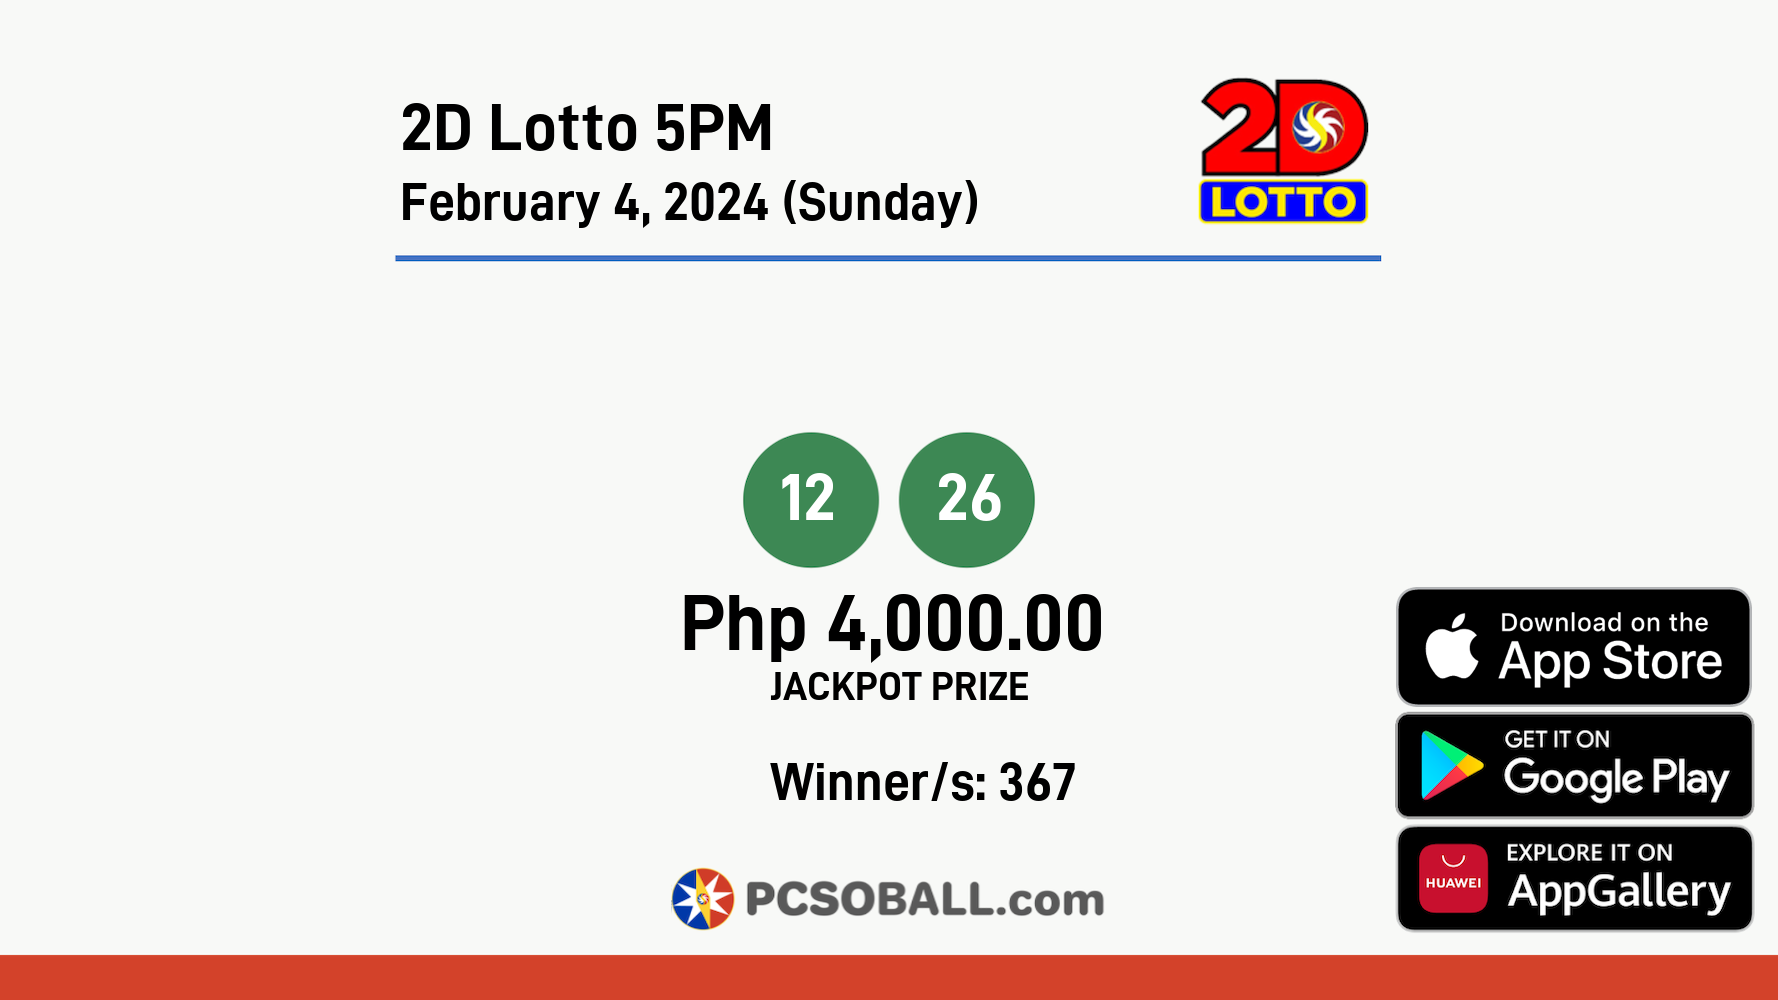 2D Lotto 5PM February 4, 2024 (Sunday) Result